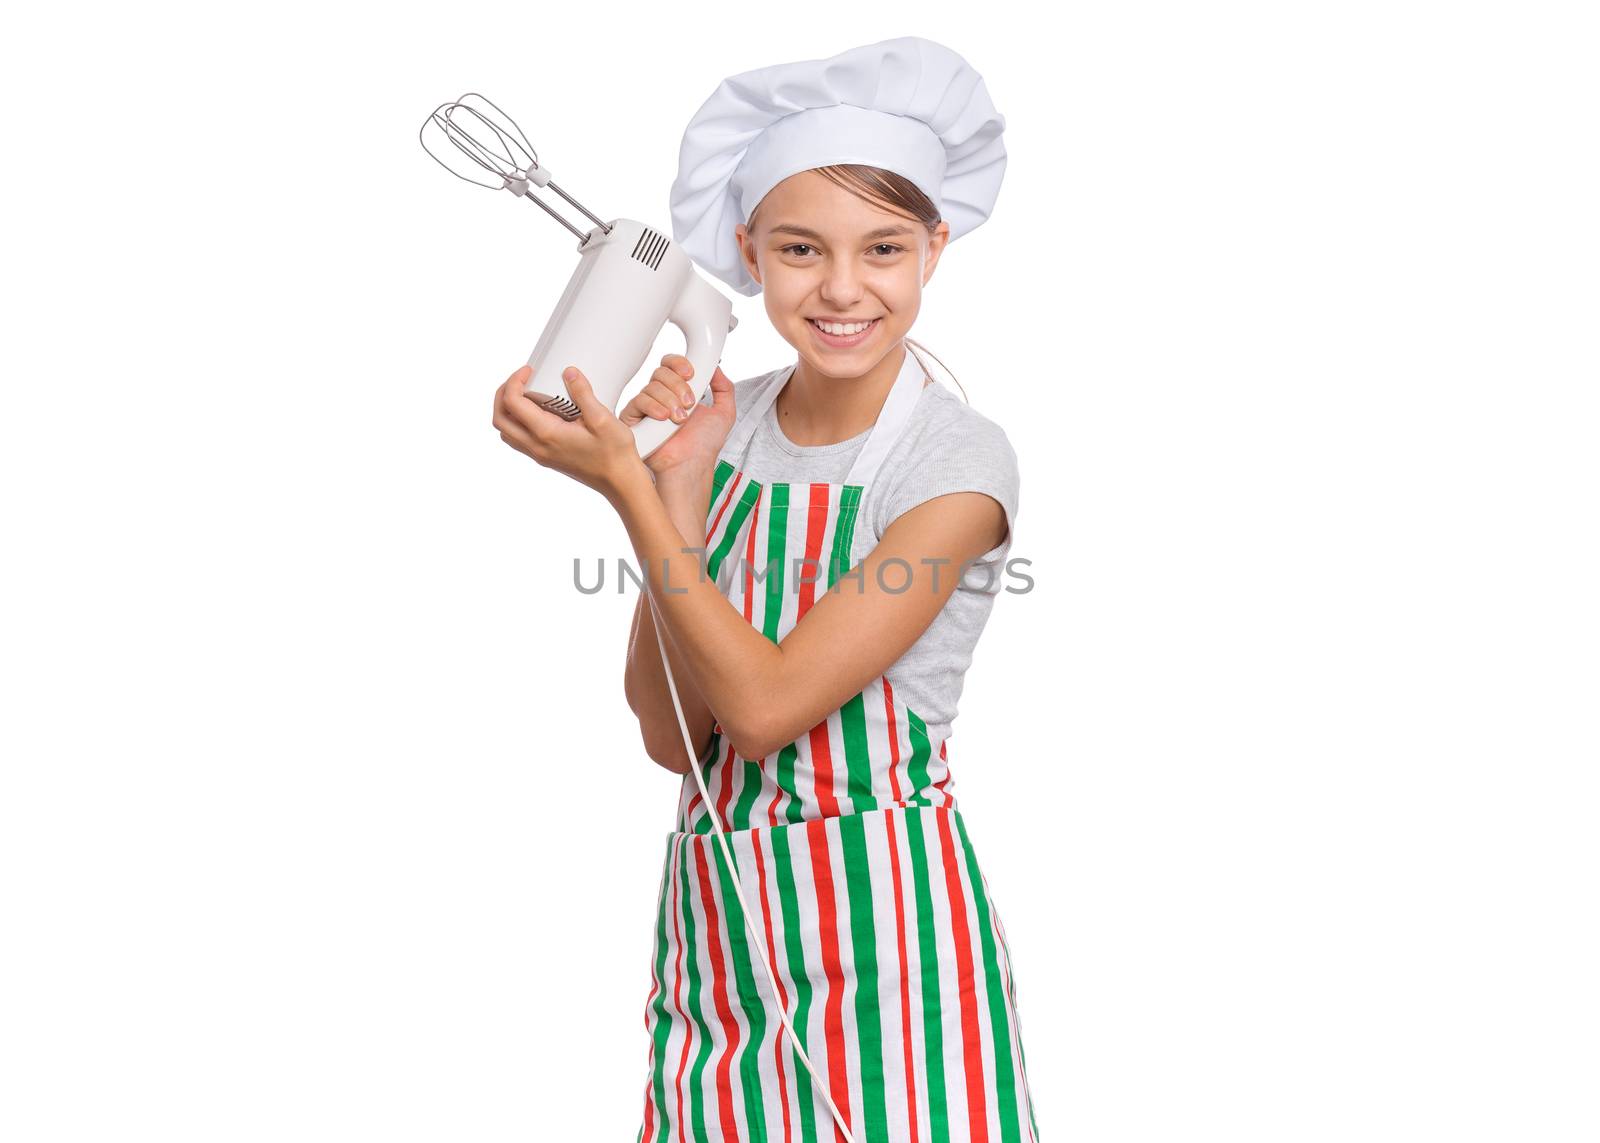 Teen girl in chef hat in apron with egg beater, isolated on white background.